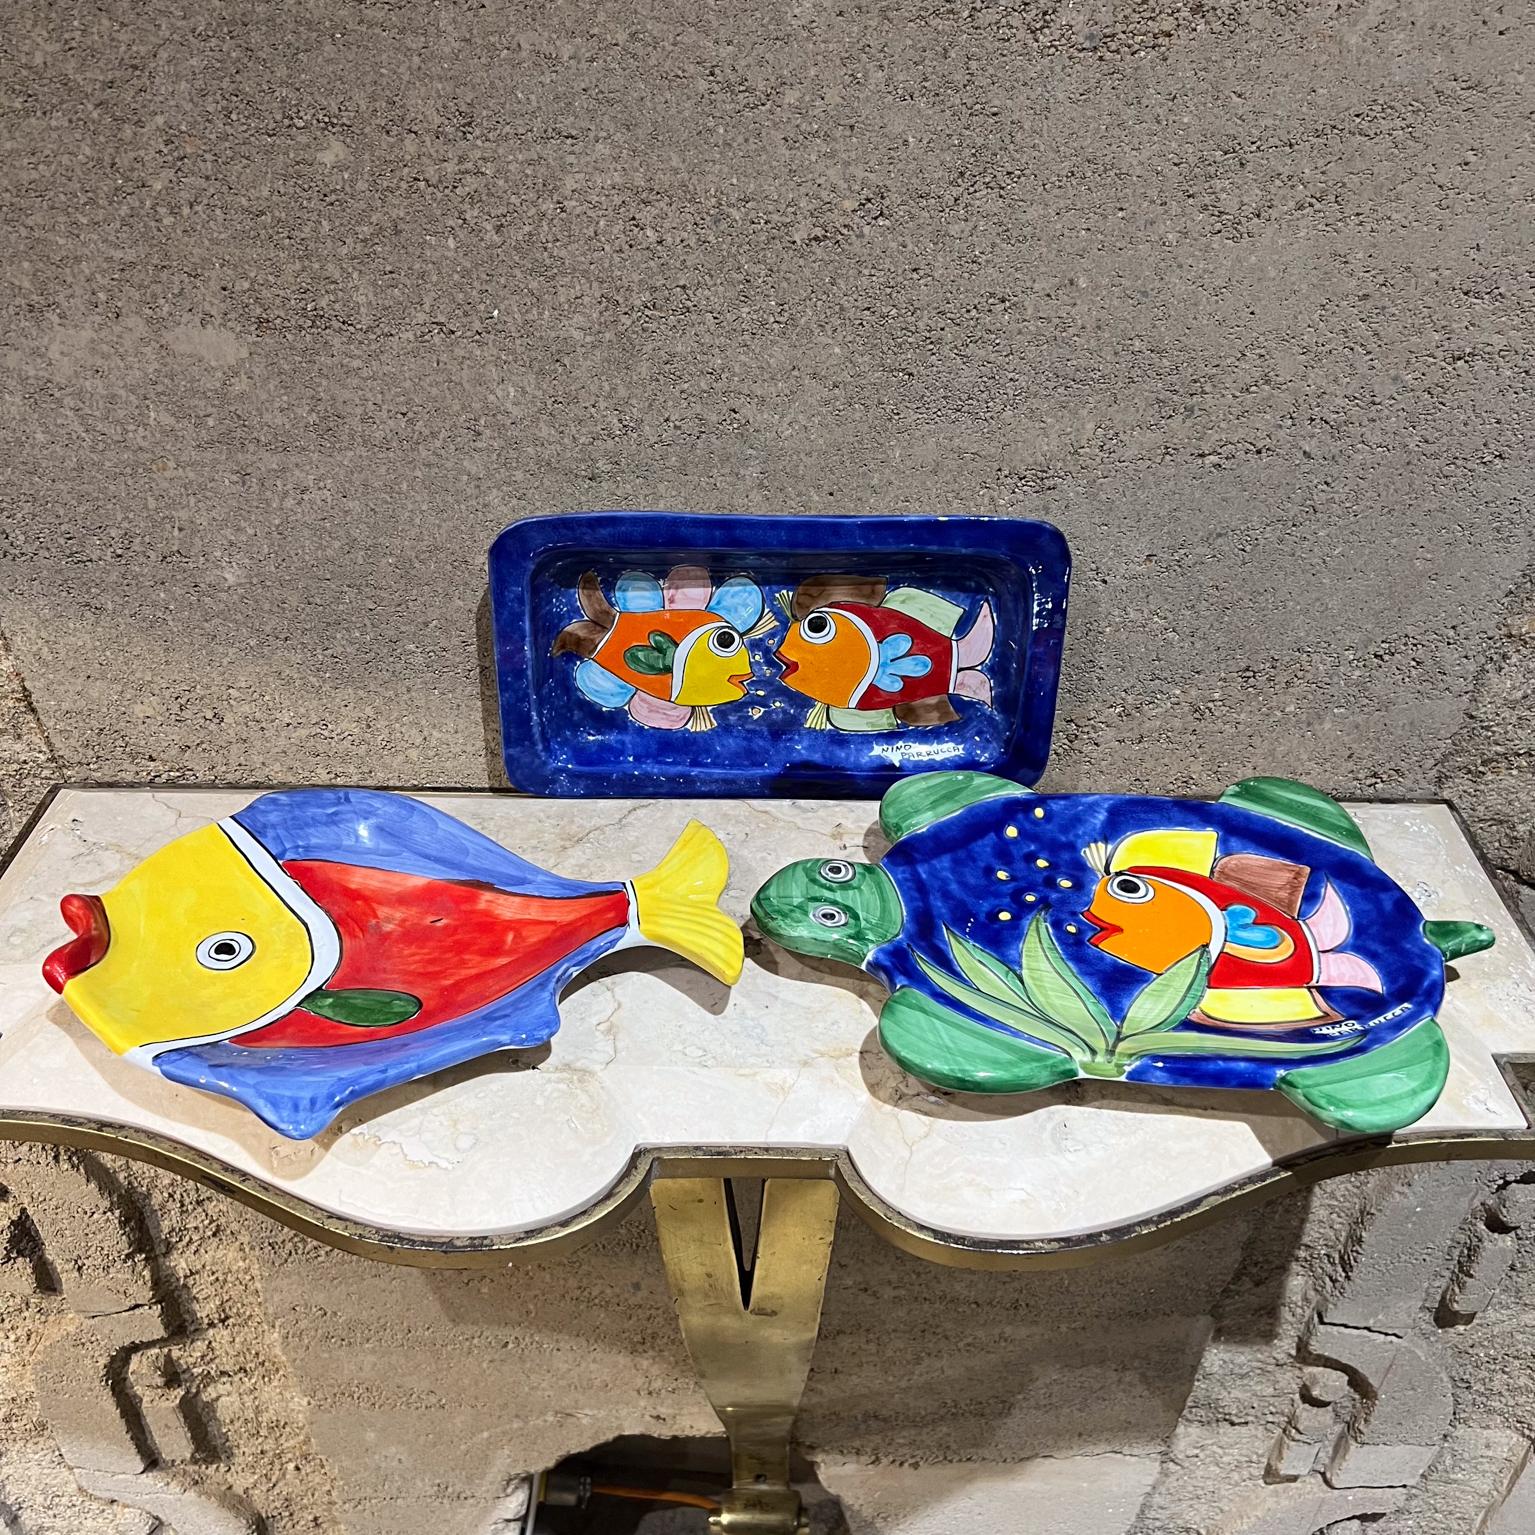 1970s Nino Parrucca Hand Painted Italian Pottery Fish Plate Set Sicily
includes Set of three plates
1.75 h x 11.5 w 8.5 d yellow tail plate
Nick on tail 12.75 long x 1.5 h x 8.25 w turtle fish
Original vintage preowned and unrestored, some